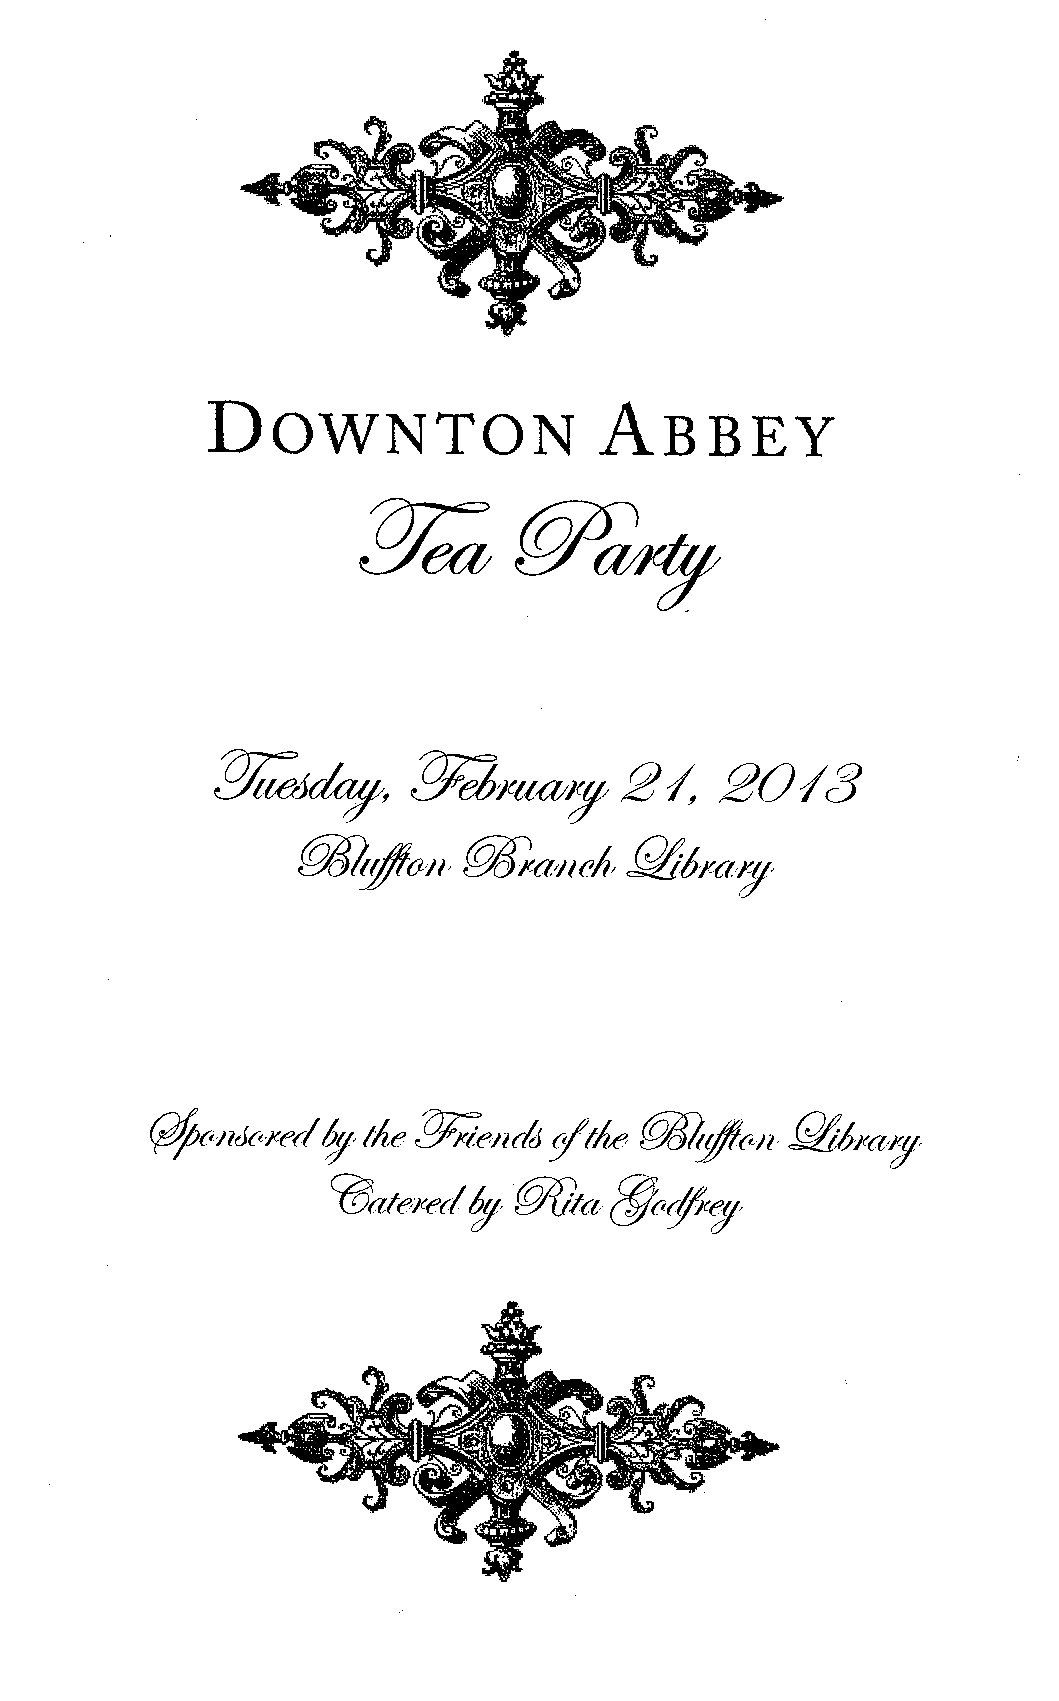 Downton Abbey Trivia Questions And Answers Printable Printable Trivia 